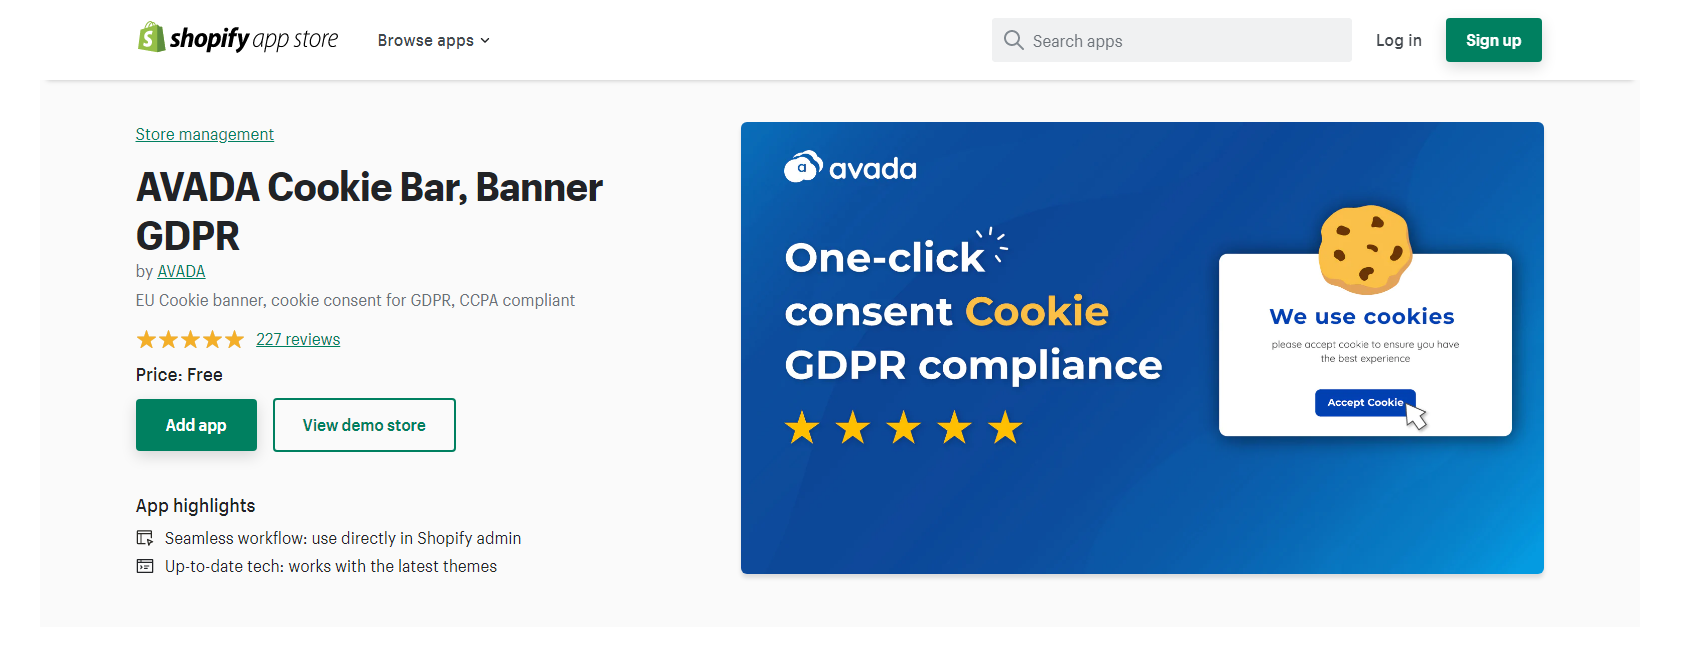 AVADA Cookie Bar - Shopify cookie apps